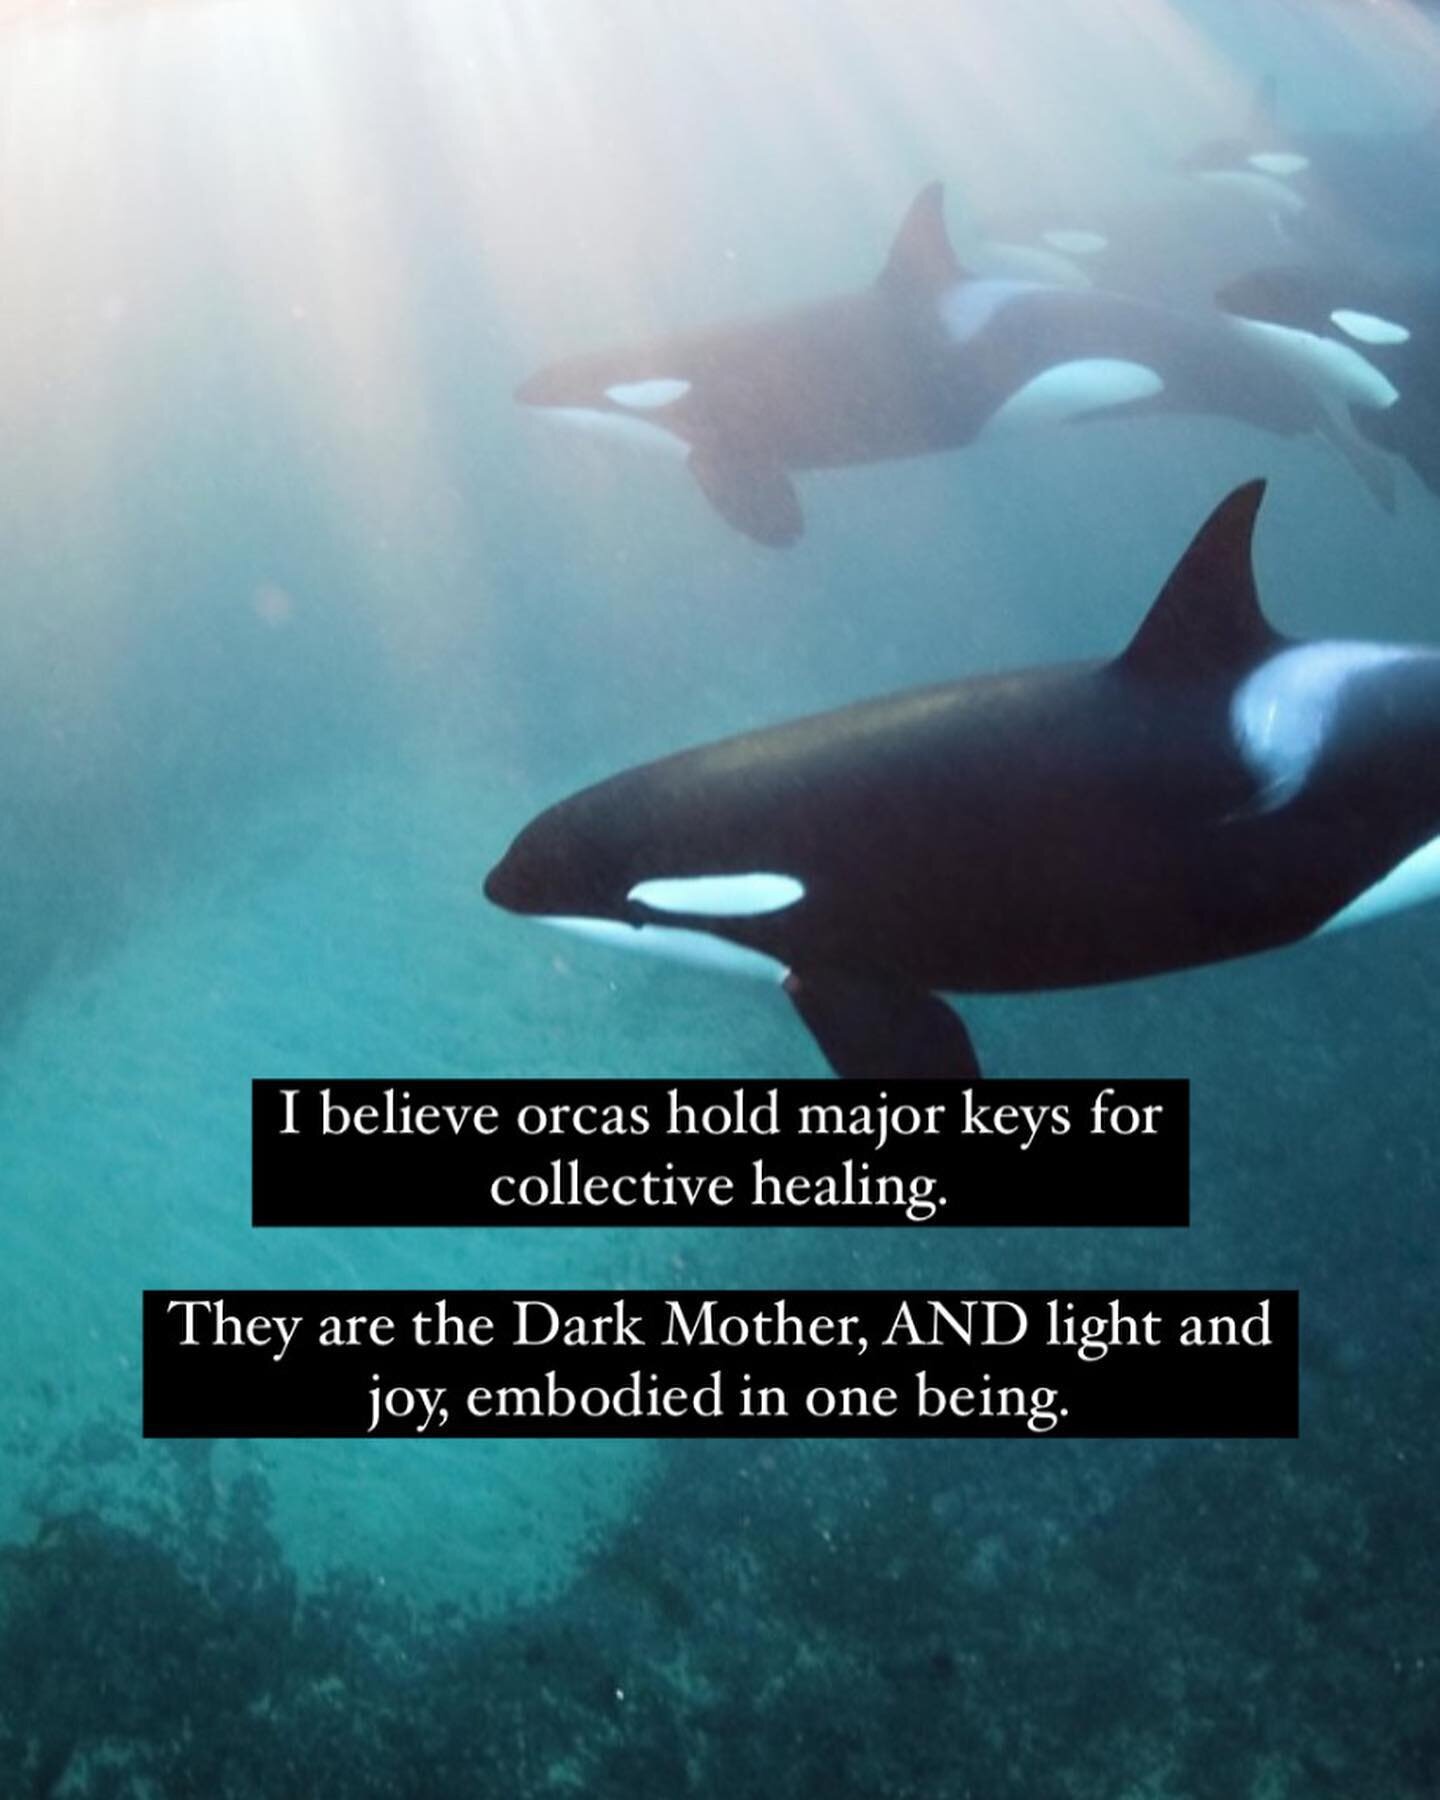 Orcas hold dark mother frequency, AND joy and light. They are teachers of how to honour the death and rebirth cycle. 

🐬🌑🐬